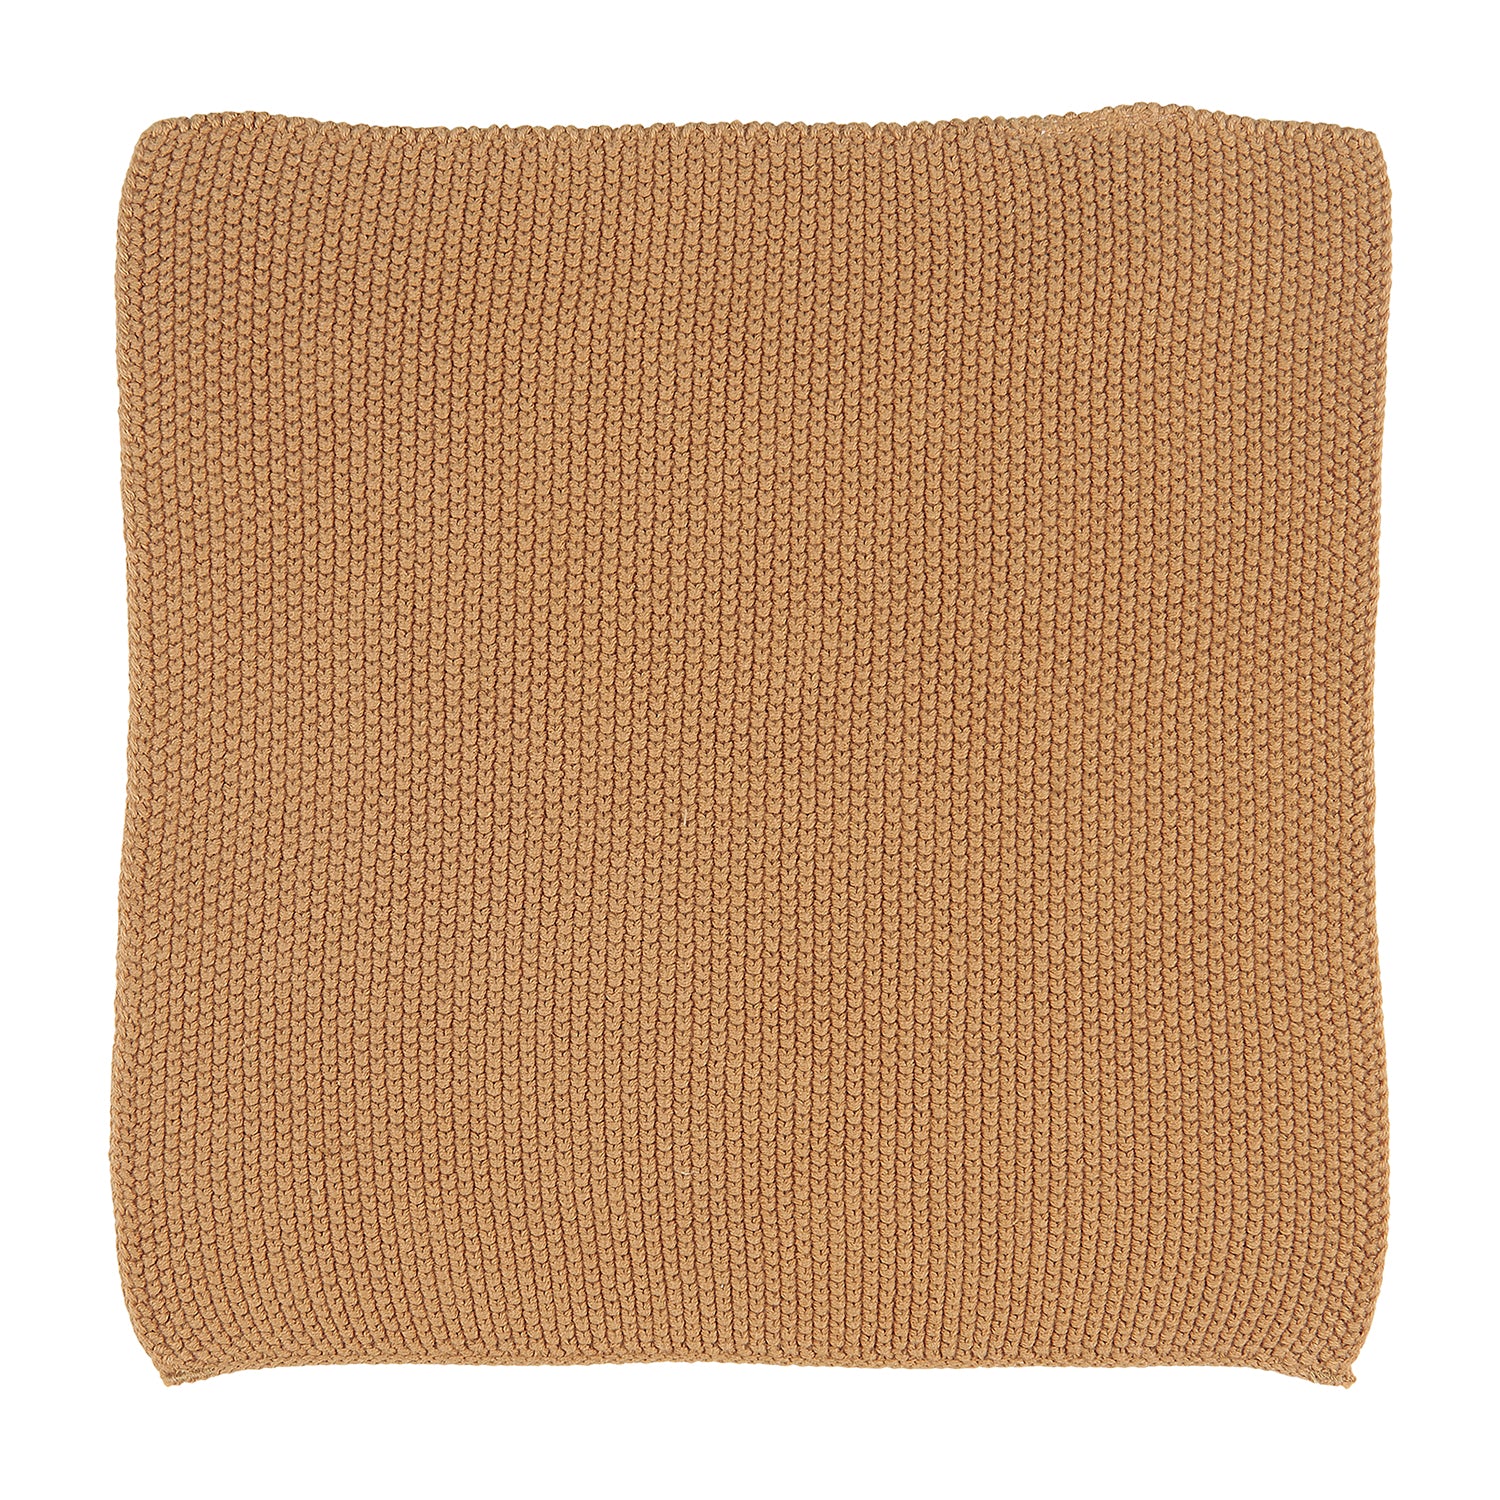 A square knitted cloth in a soft amber orange colour.